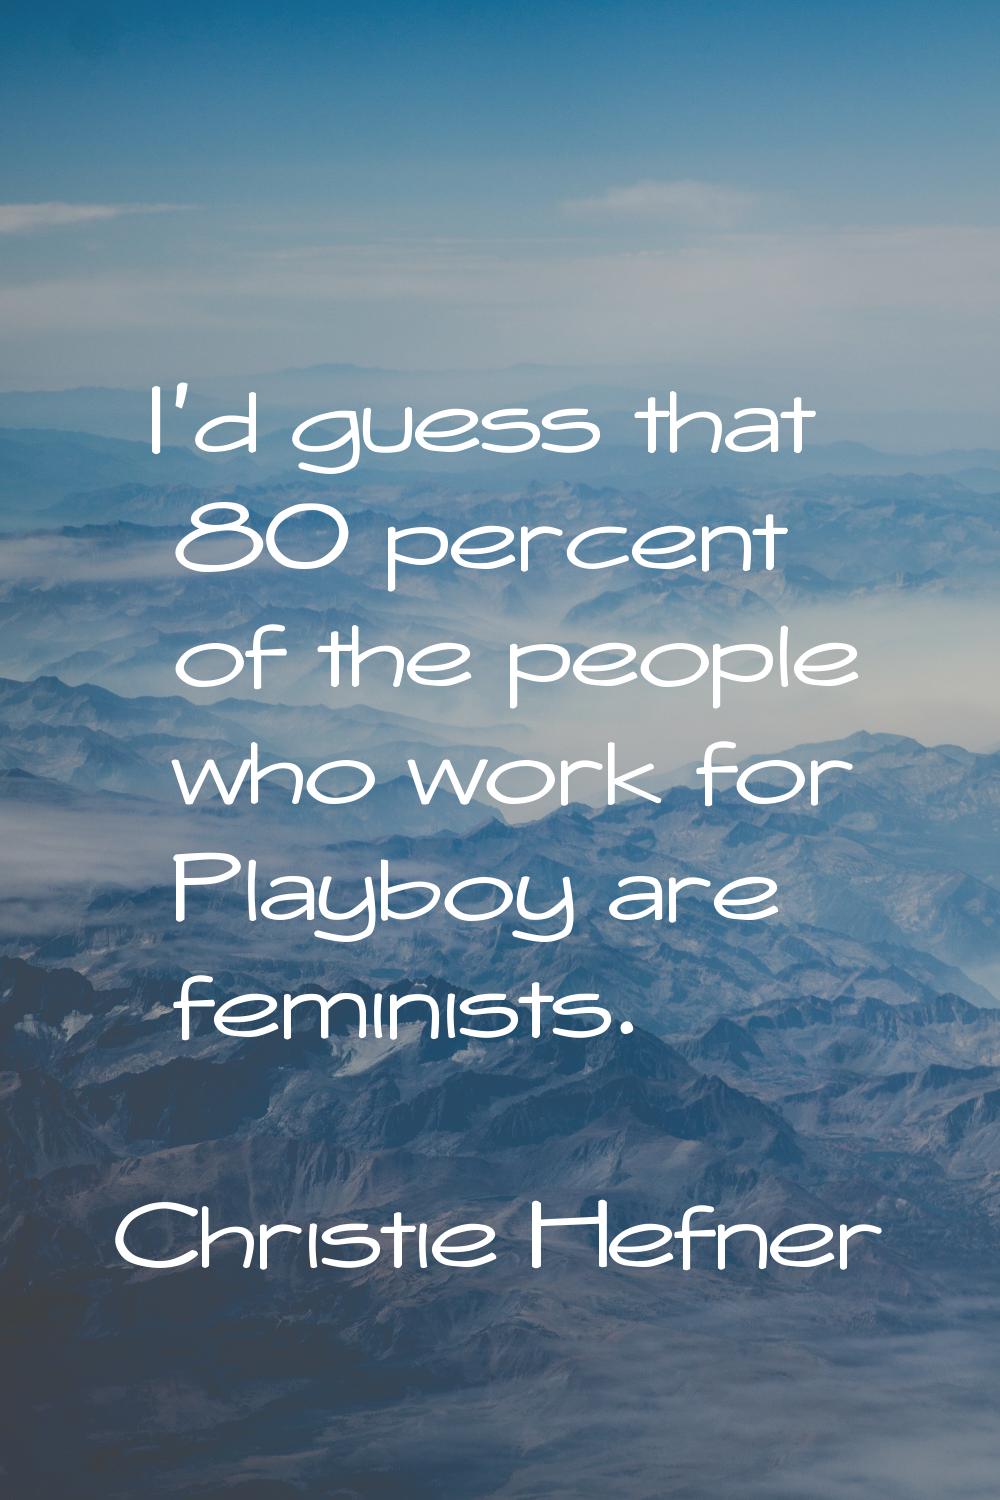 I'd guess that 80 percent of the people who work for Playboy are feminists.